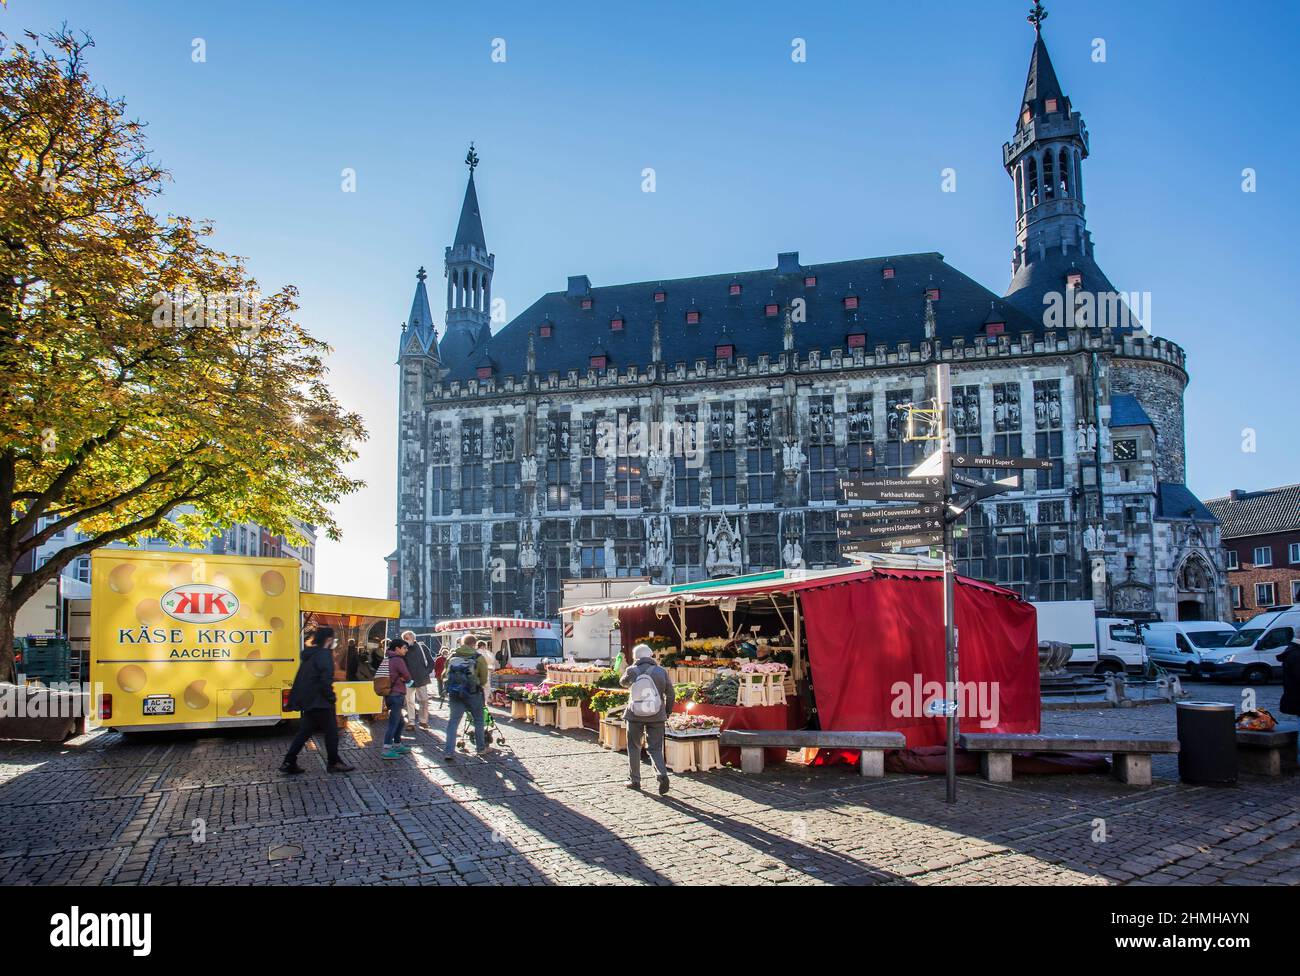 Weekly market in front of the Gothic town hall in the old town, Aachen, North Rhine-Westphalia, Germany Stock Photo